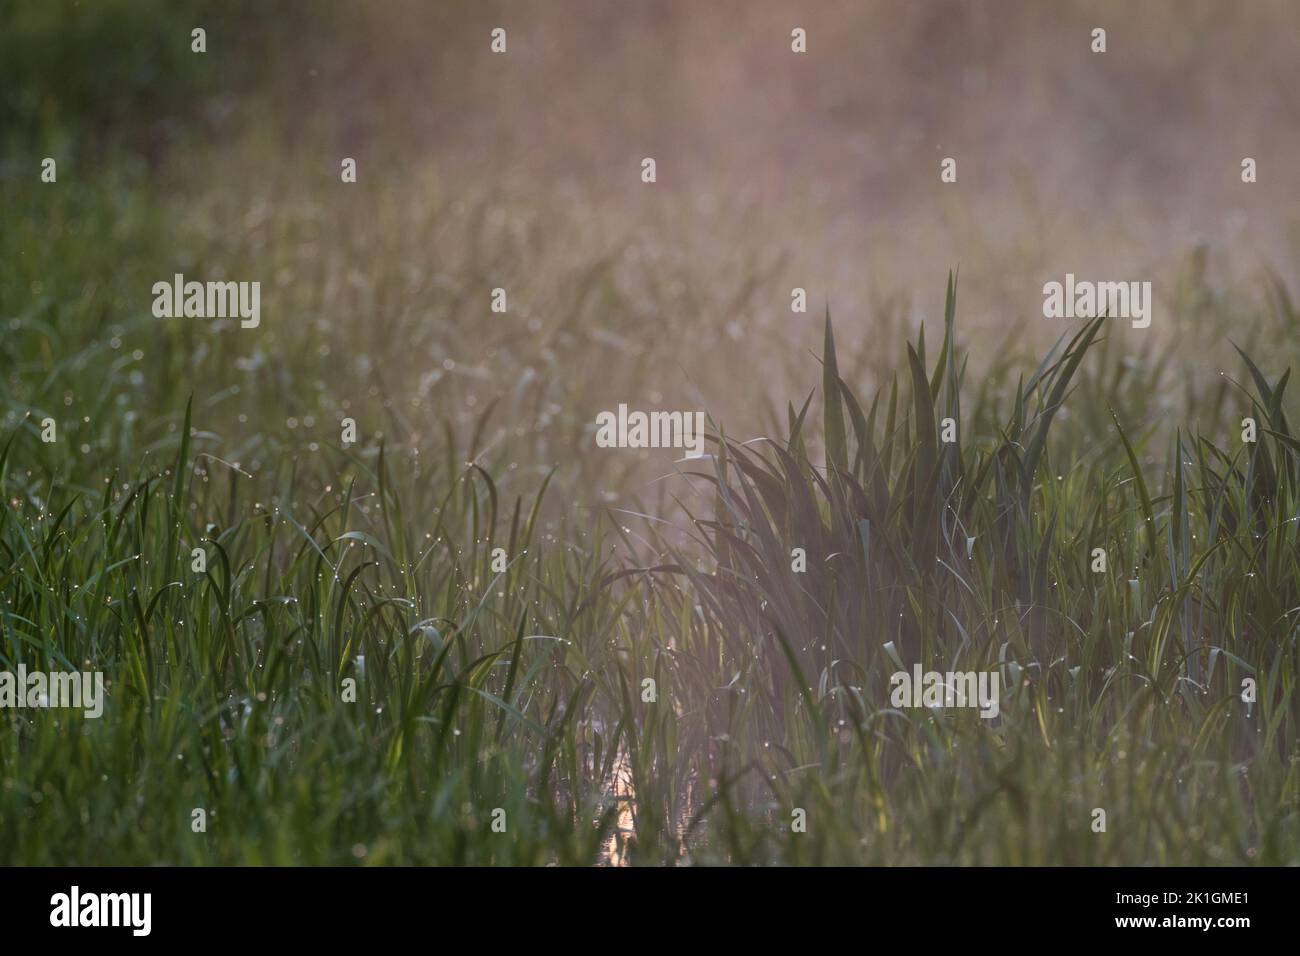 Mist over grass and reed in evening with water drops on leaves, Podlaskie Voivodeship, Poland,Europe Stock Photo